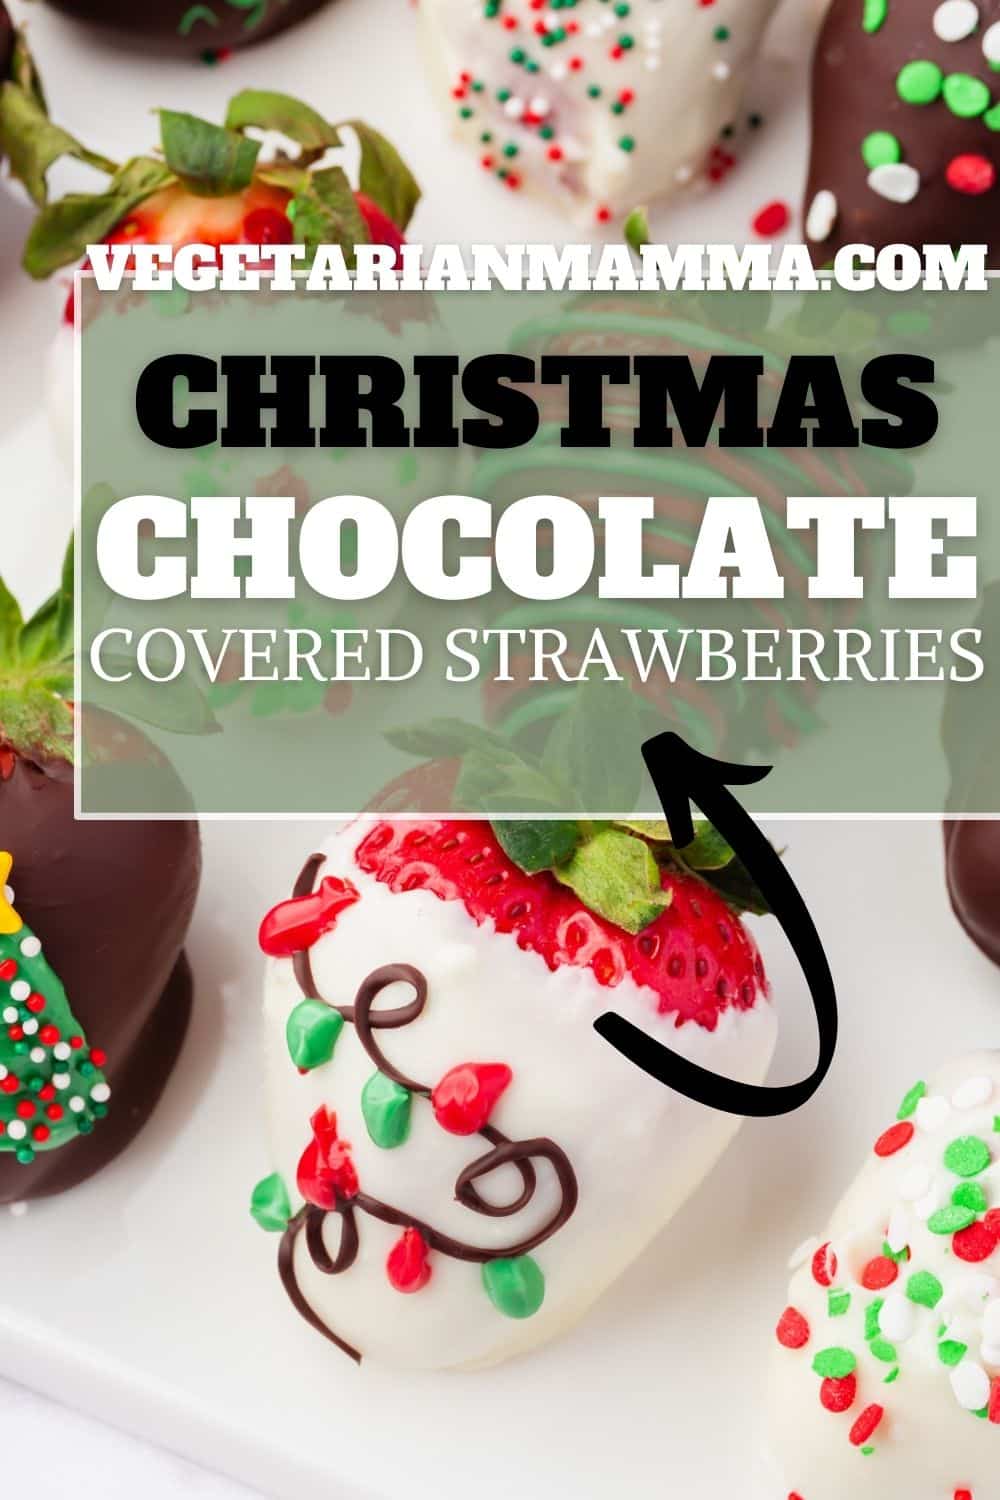 Christmas Chocolate Covered Strawberries are so fun for the holiday season! Have fun decorating strawberries for Christmas with sprinkles and candy melts.